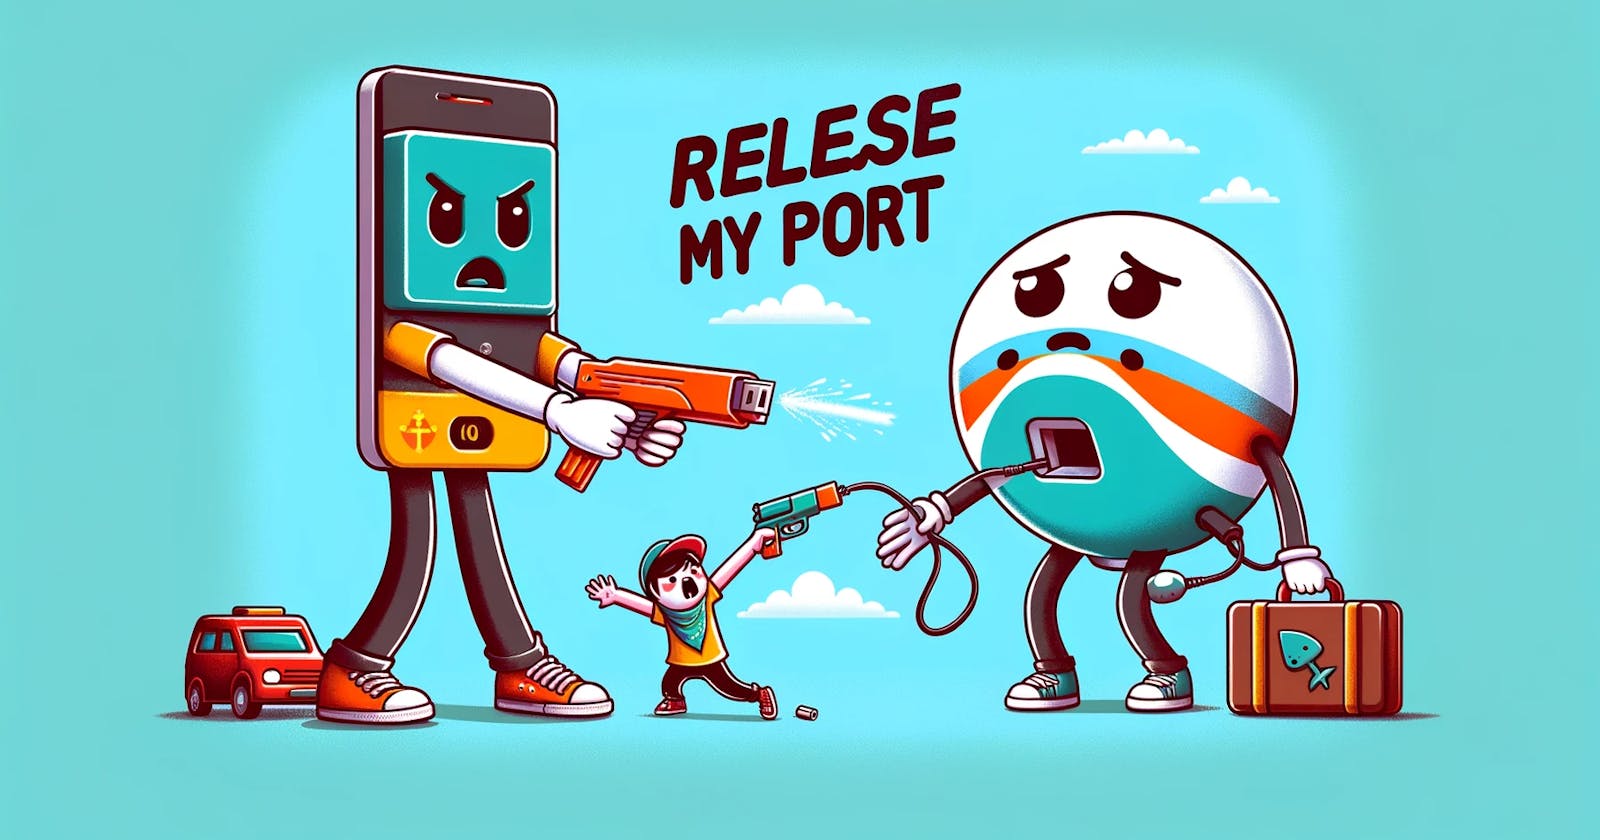 Release my port!